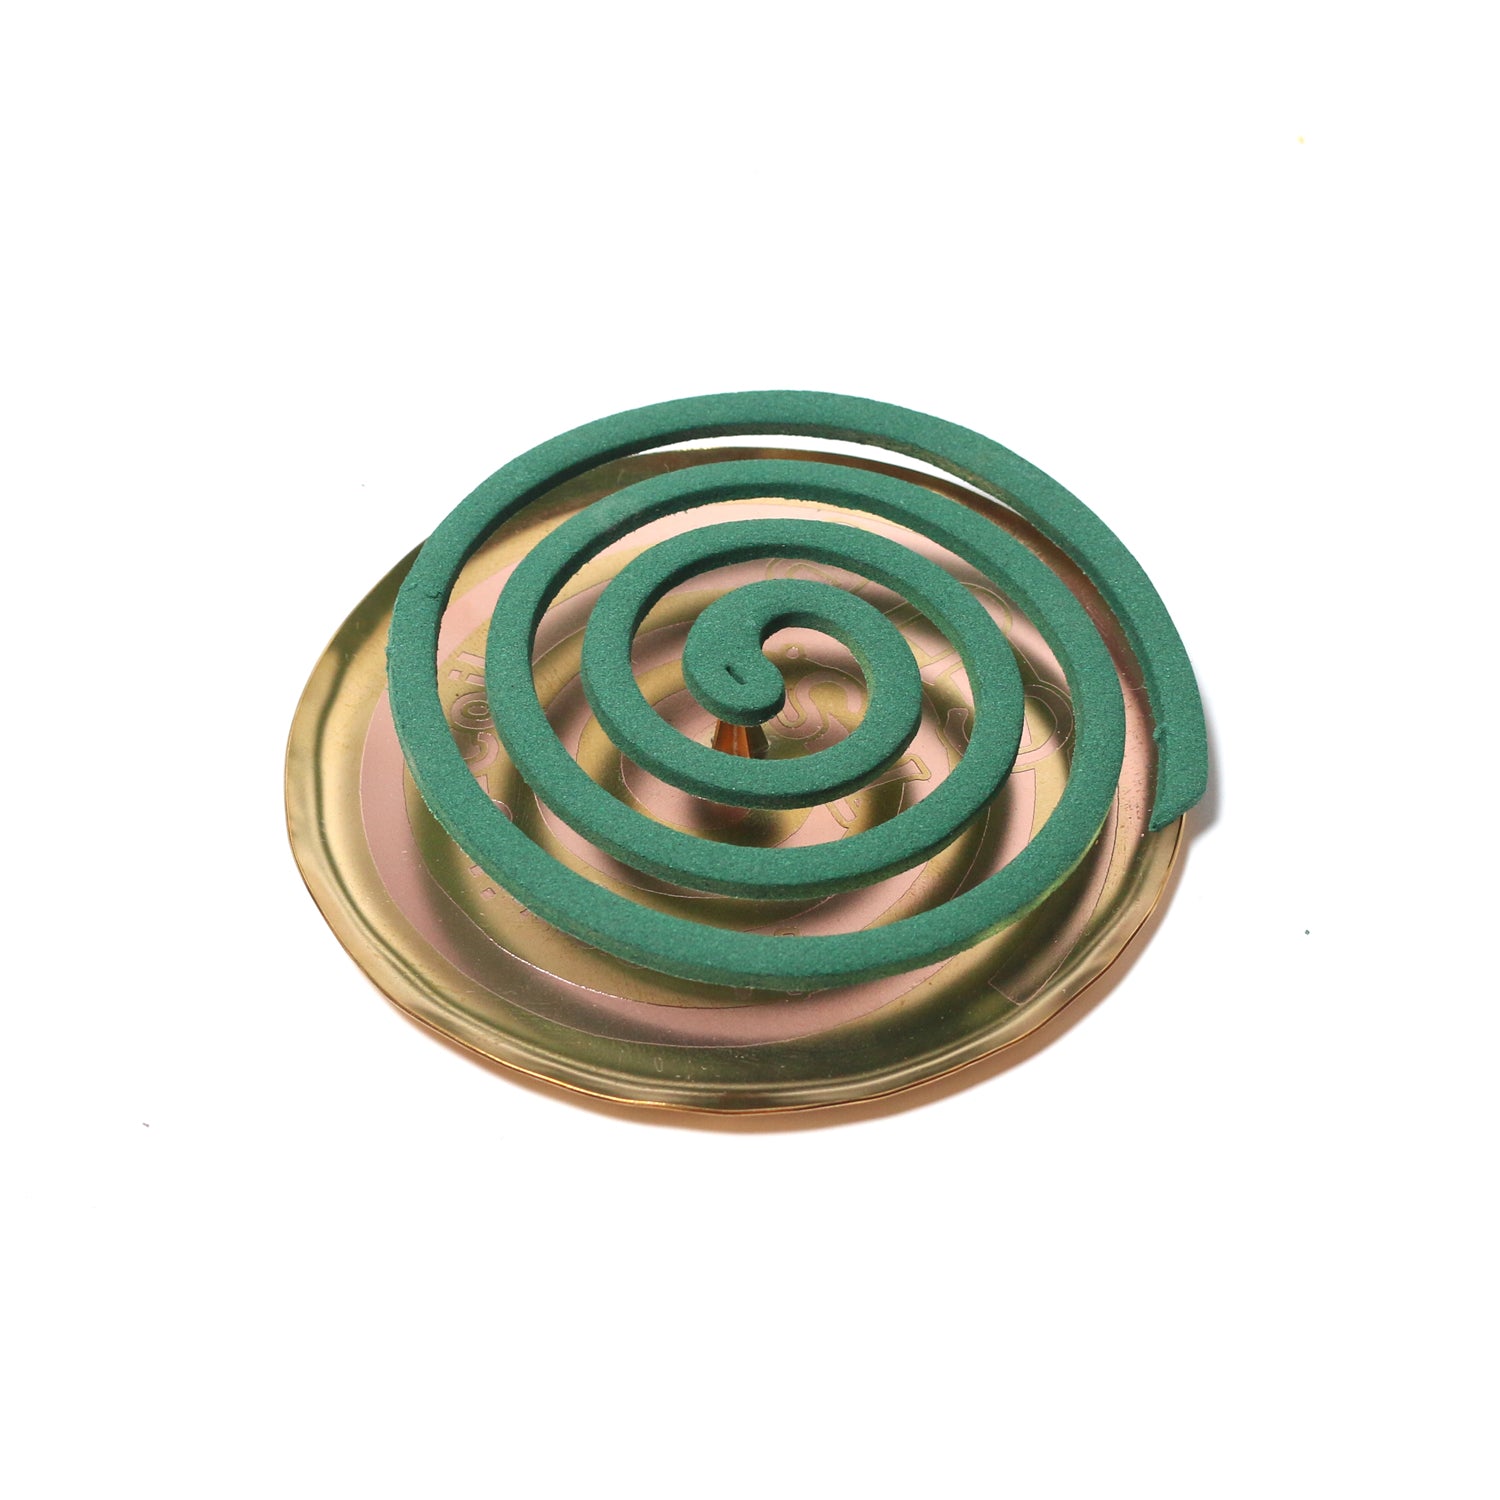 CUB0025 mosquito coil tray